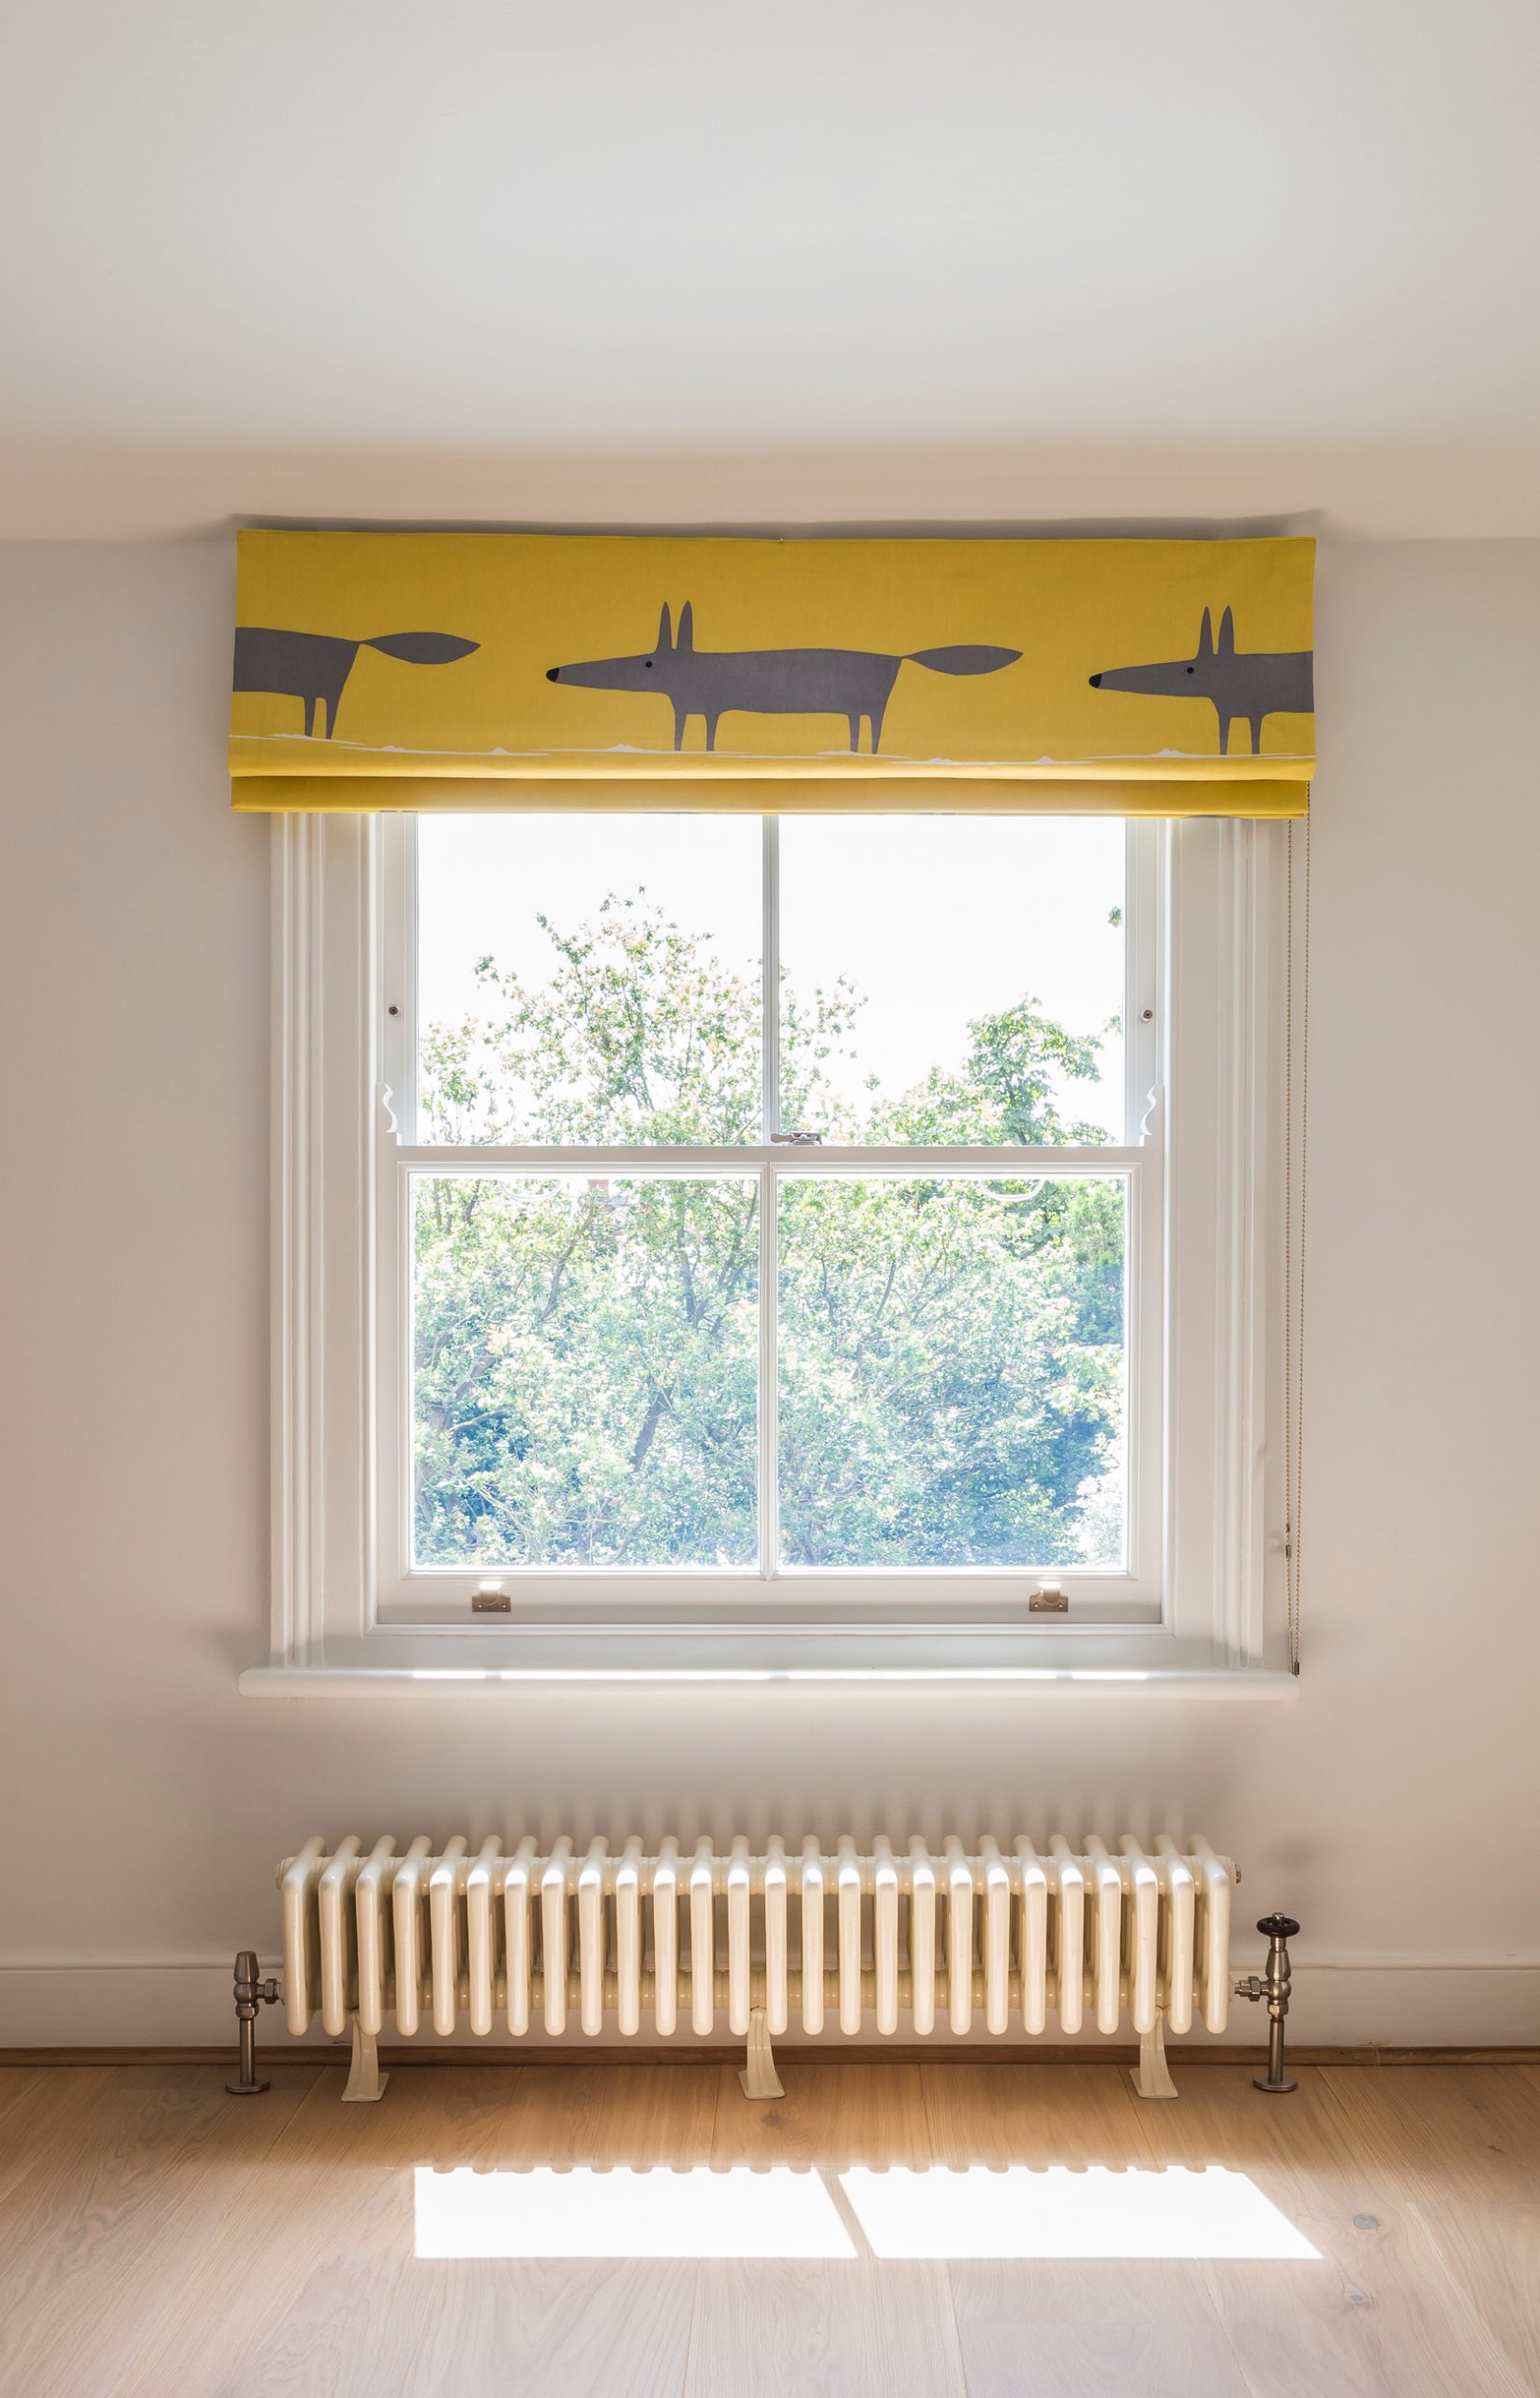 Edwardian Townhouse - Kids bedroom radiator and blinds detail